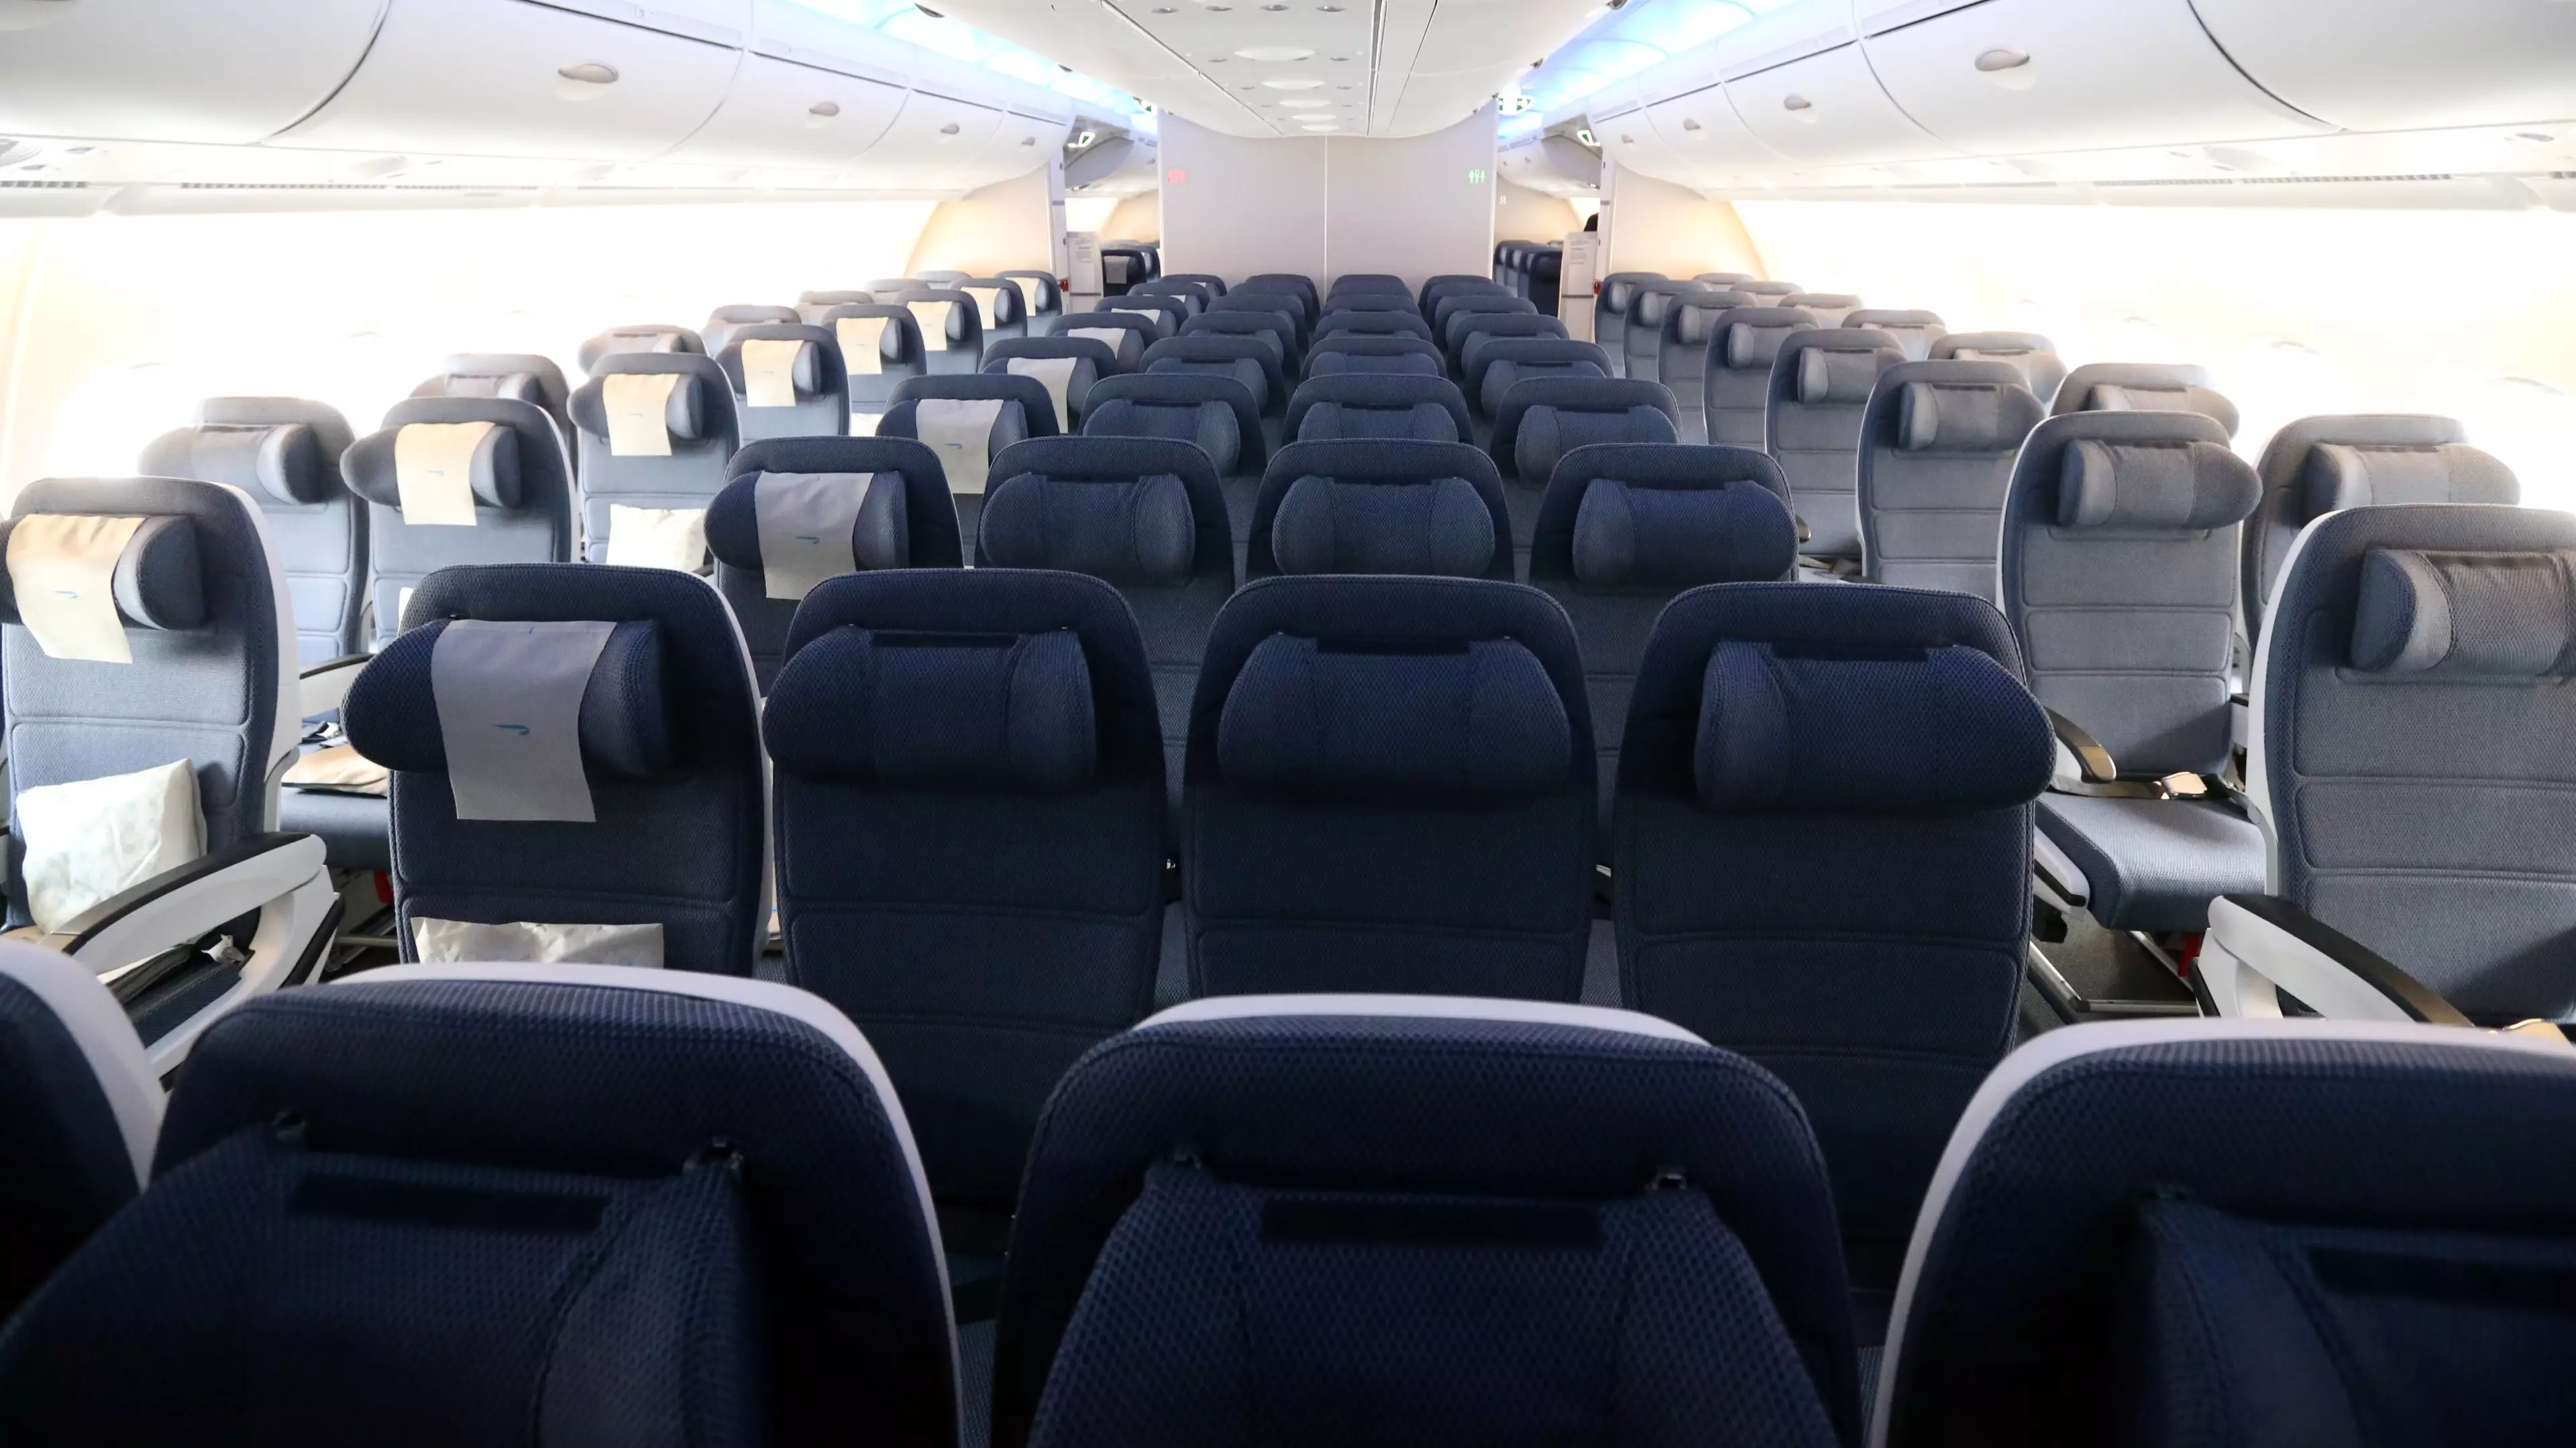 Travel Expert Says You Should Always Pick The 'Worst' Seat On Plane